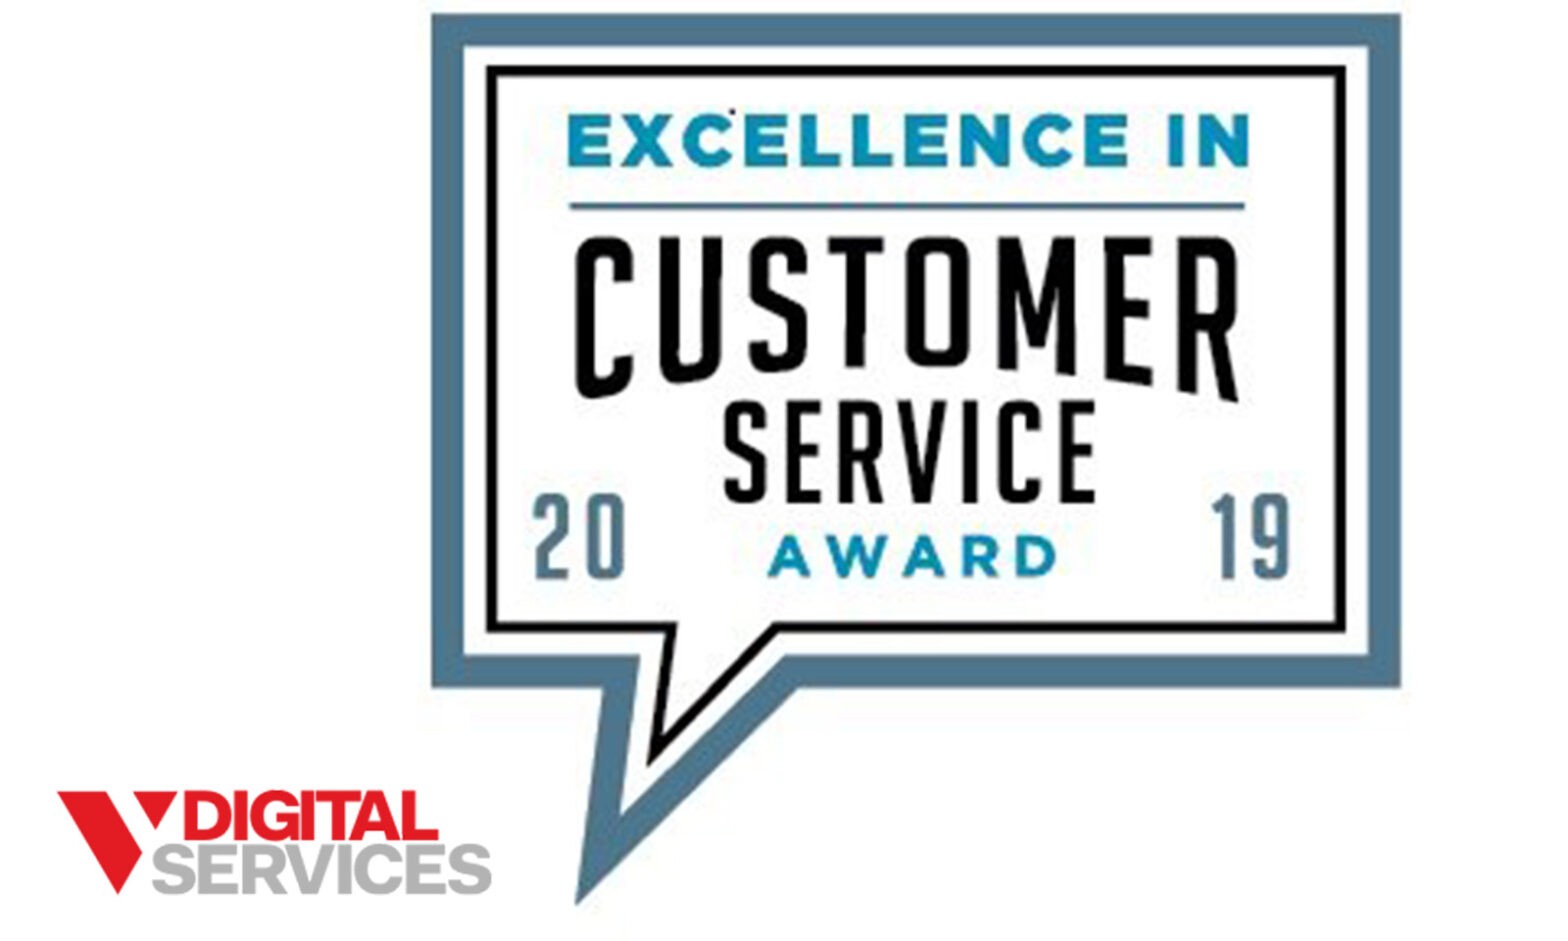 Featured image for post: V DIGITAL SERVICES WINS EXCELLENCE IN CUSTOMER SERVICE AWARD